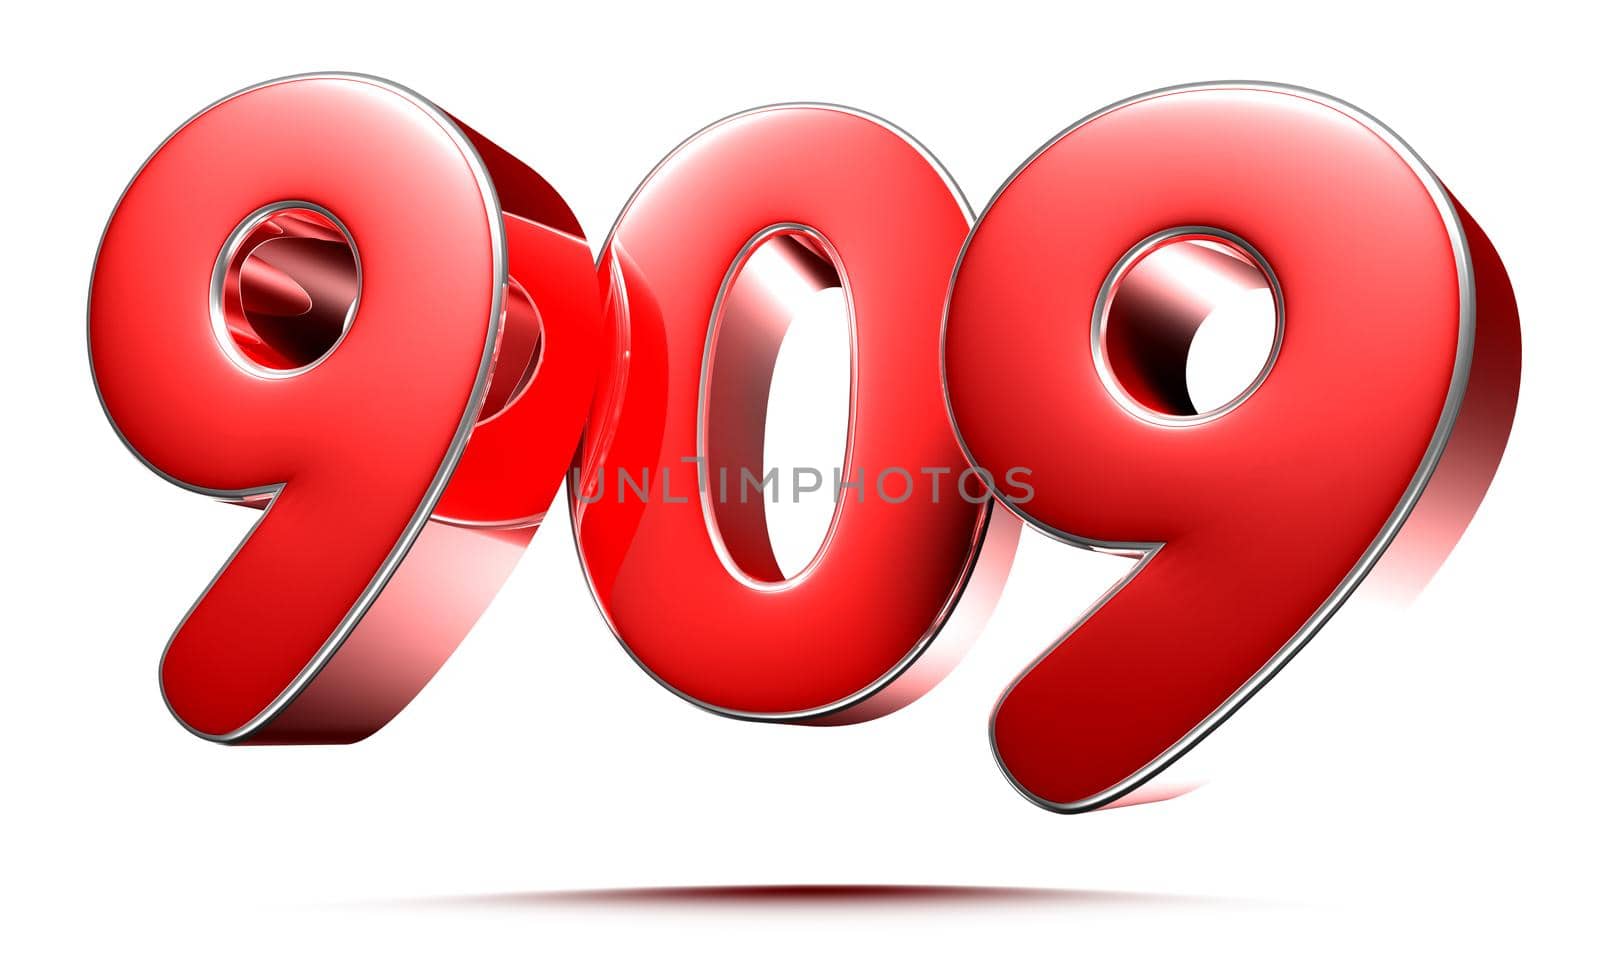 Rounded red numbers 909 on white background 3D illustration with clipping path